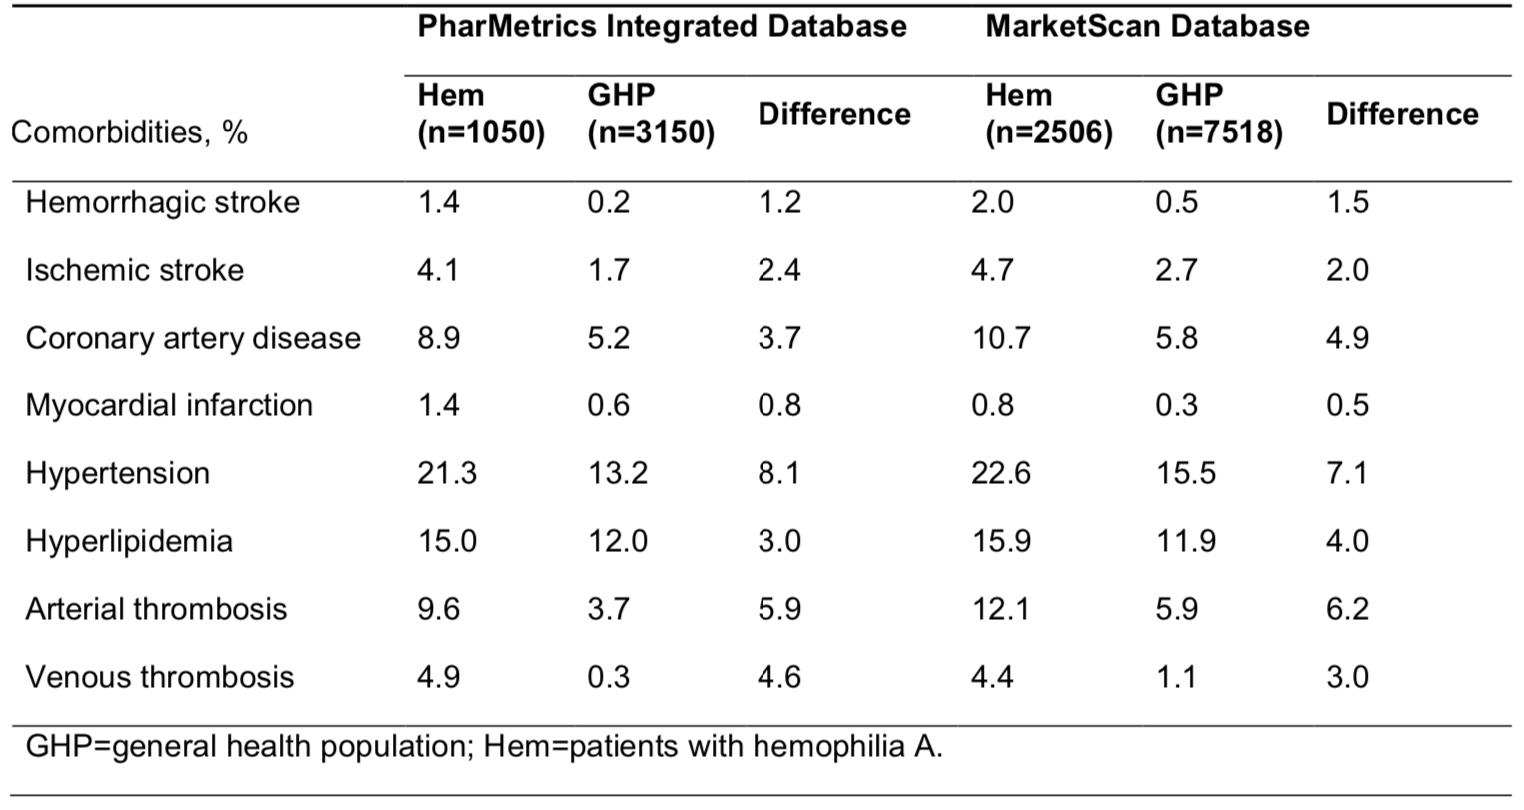 Table: Cardiovascular comorbidities in patients with hemophilia A